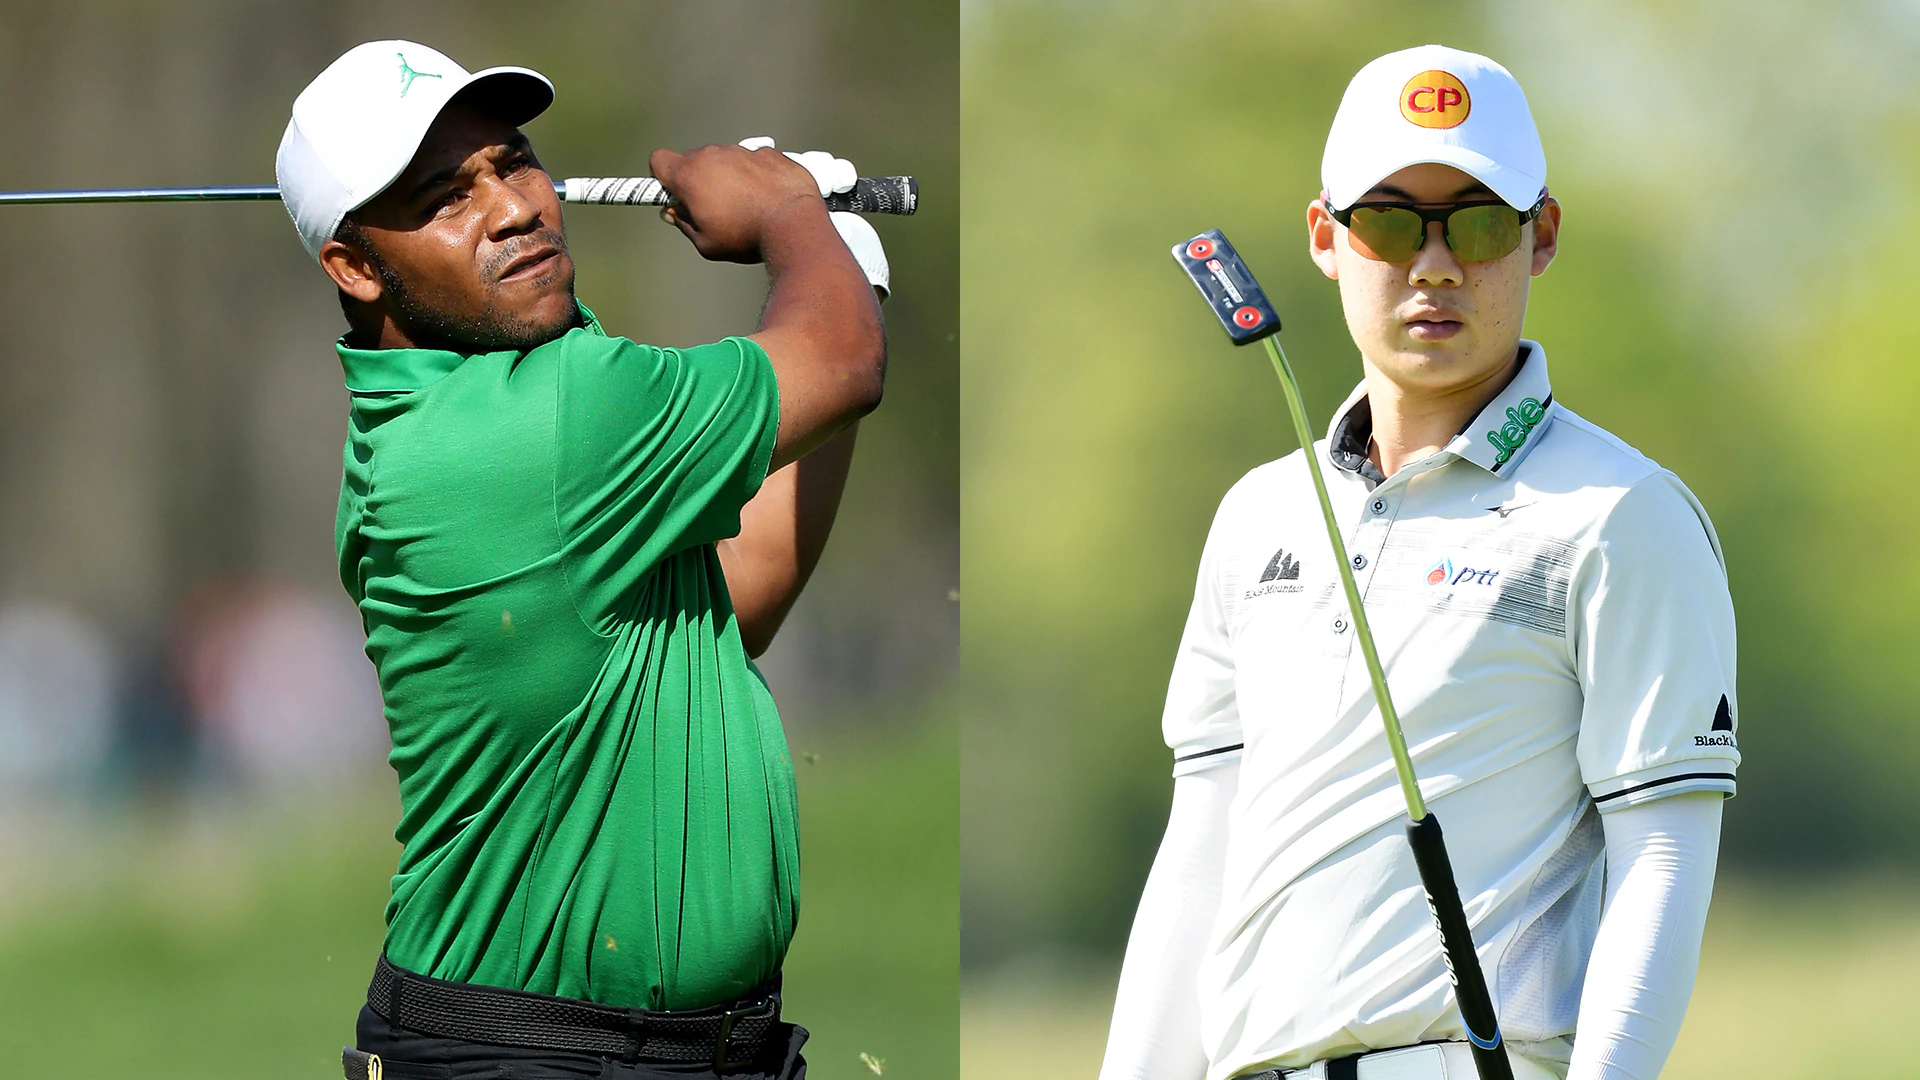 Bit players in a one-man race, Varner III, Janewattananond still motivated at Bethpage